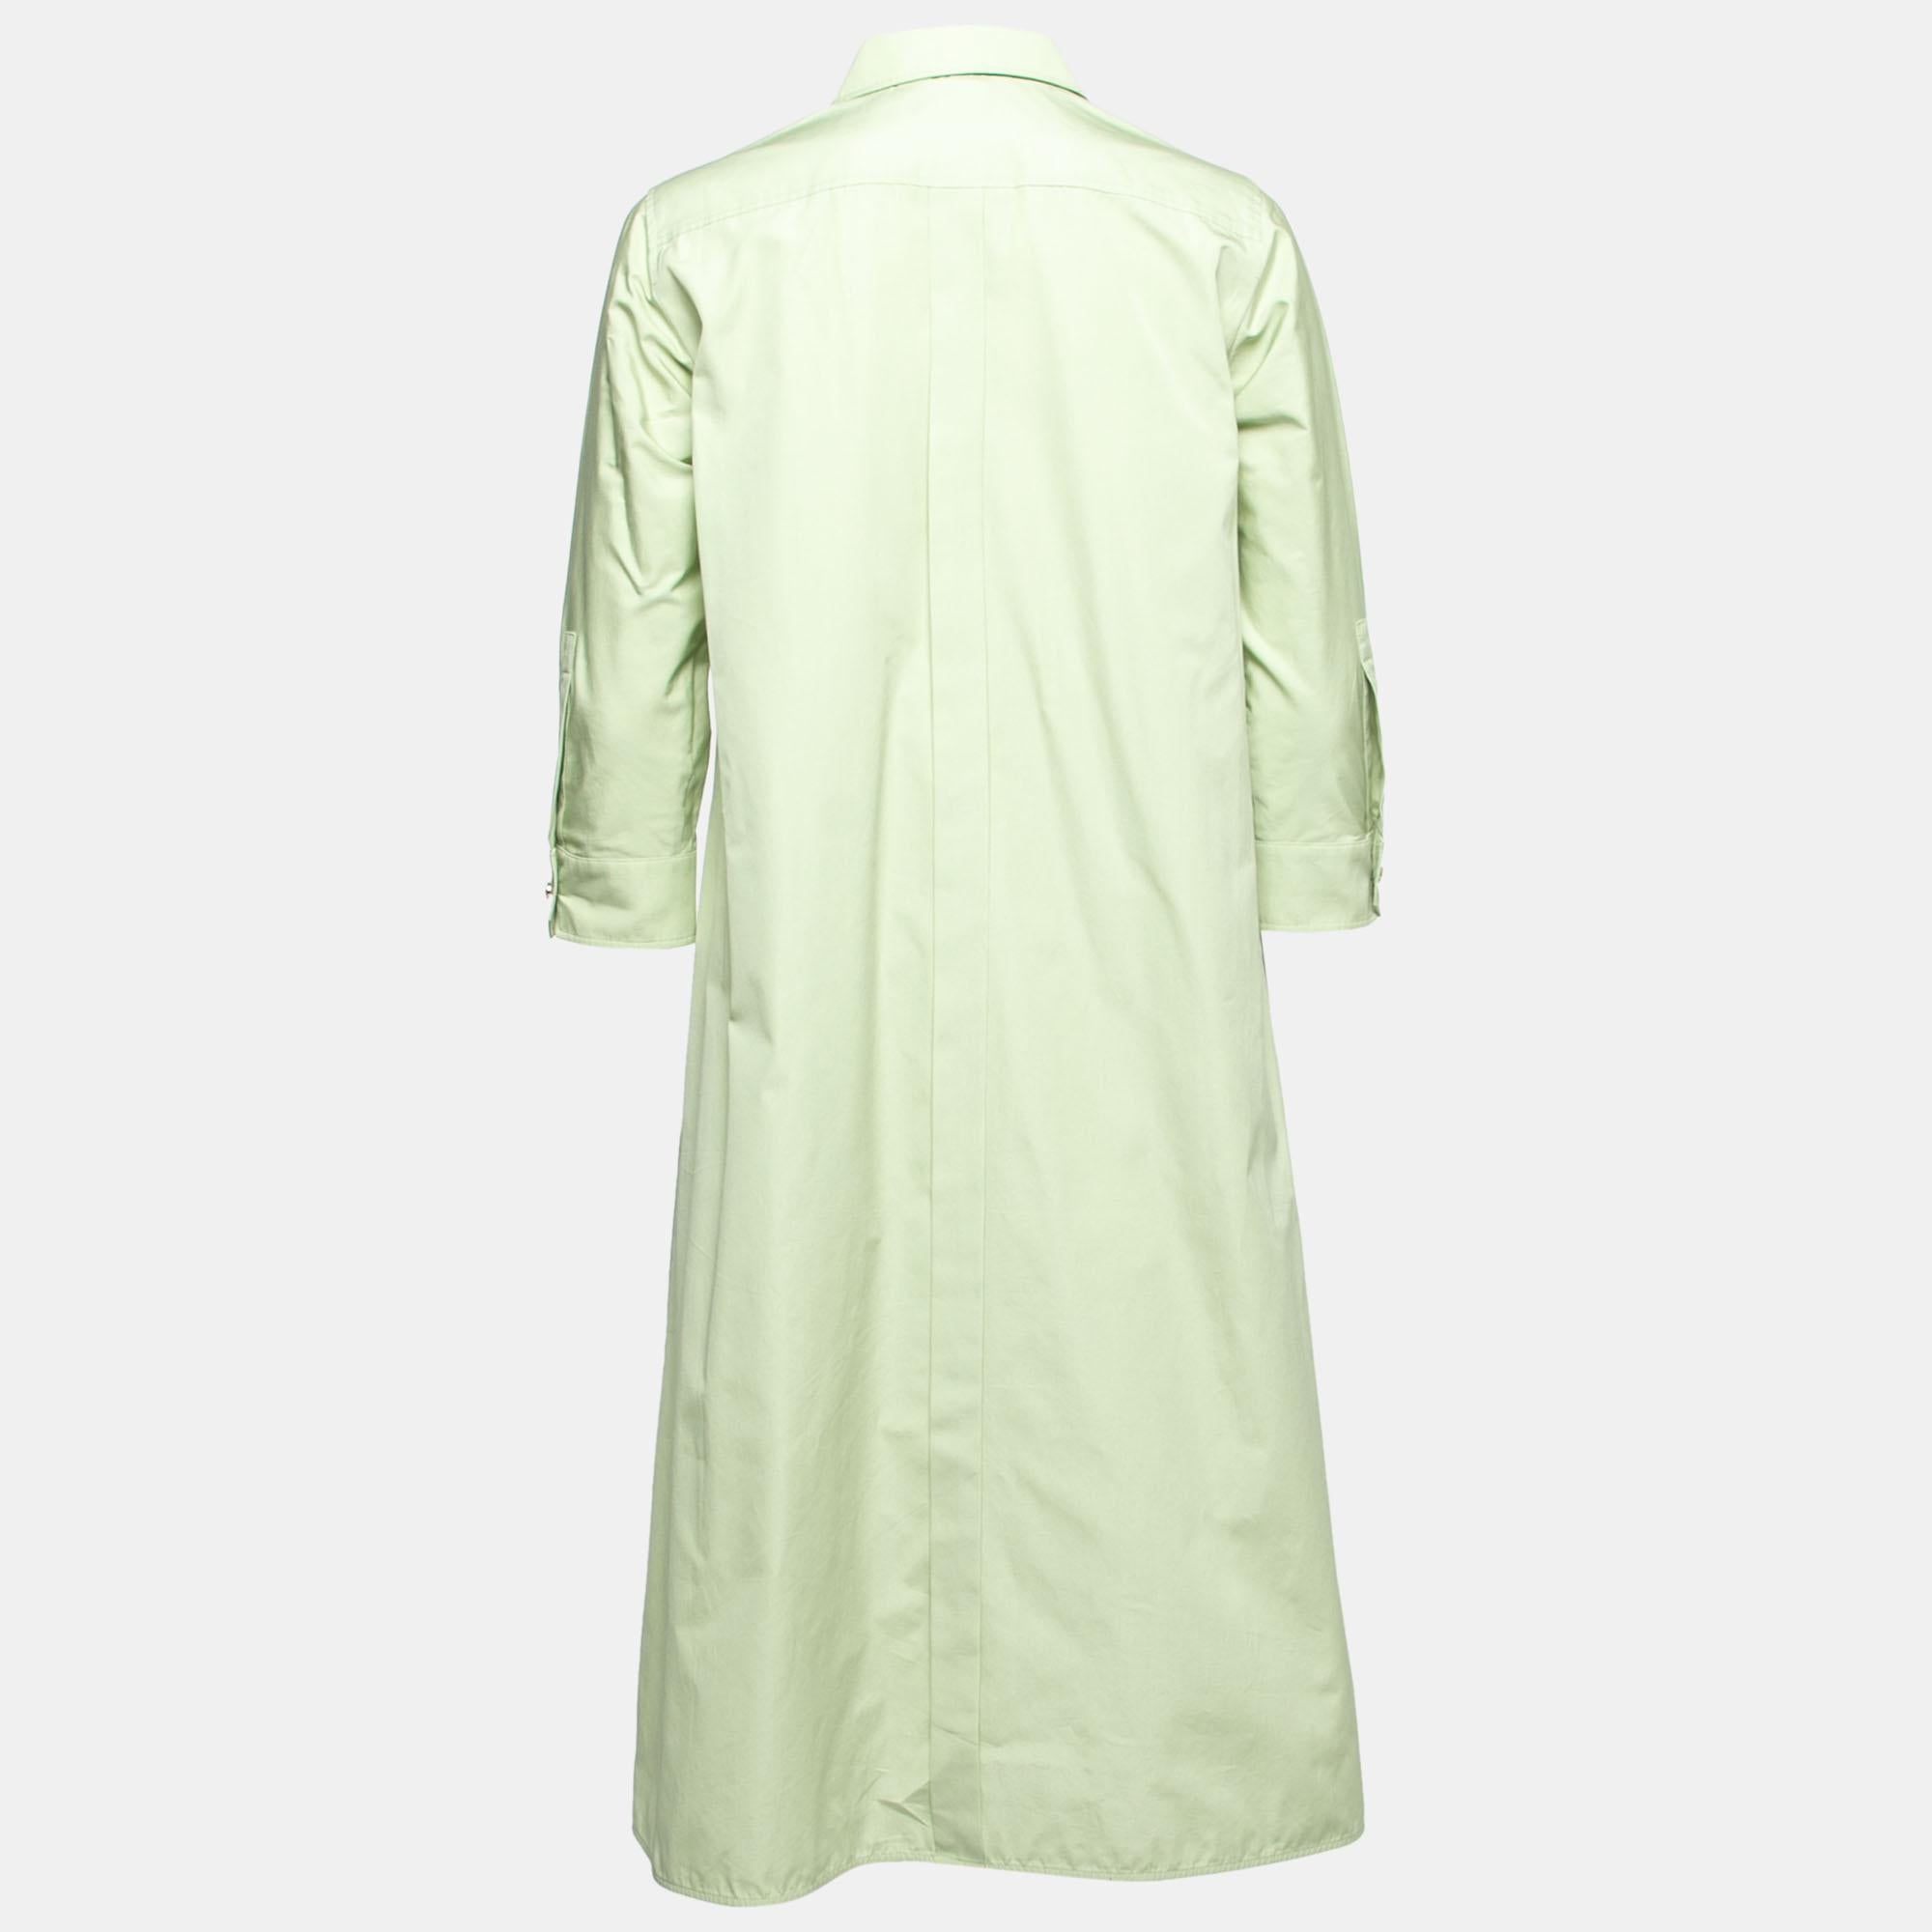 Max Mara brings you this shirt dress to incorporate elegance and class into your attire. It is designed using light-green cotton fabric. It flaunts four pockets and buttoned closure. Look stylish as you wear this shirt dress.

